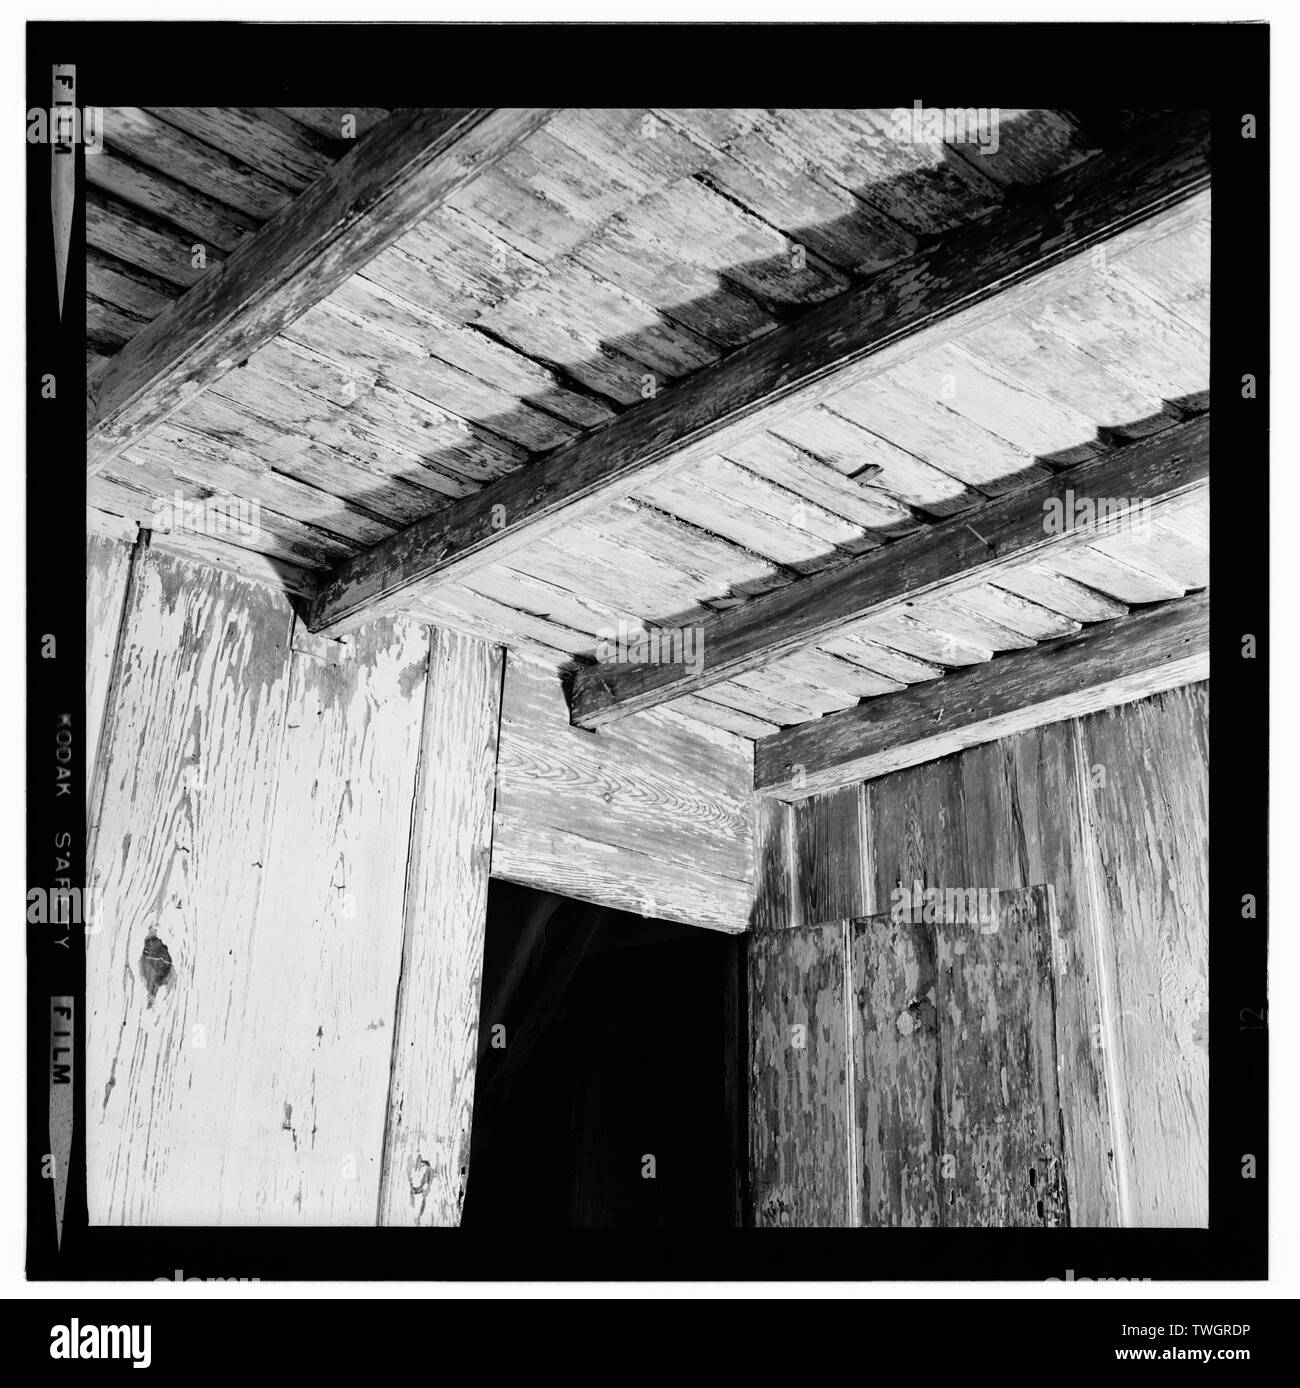 ROOF, DETAIL OF ORIGINAL RIVEN CLAPBOARDS - Clover Fields, Forman's Lodge Road, Wye Mills, Talbot County, MD; Hemsley, William; Forman; Langenbach, Randolph, photographer; Smith, Delos H, photographer Stock Photo